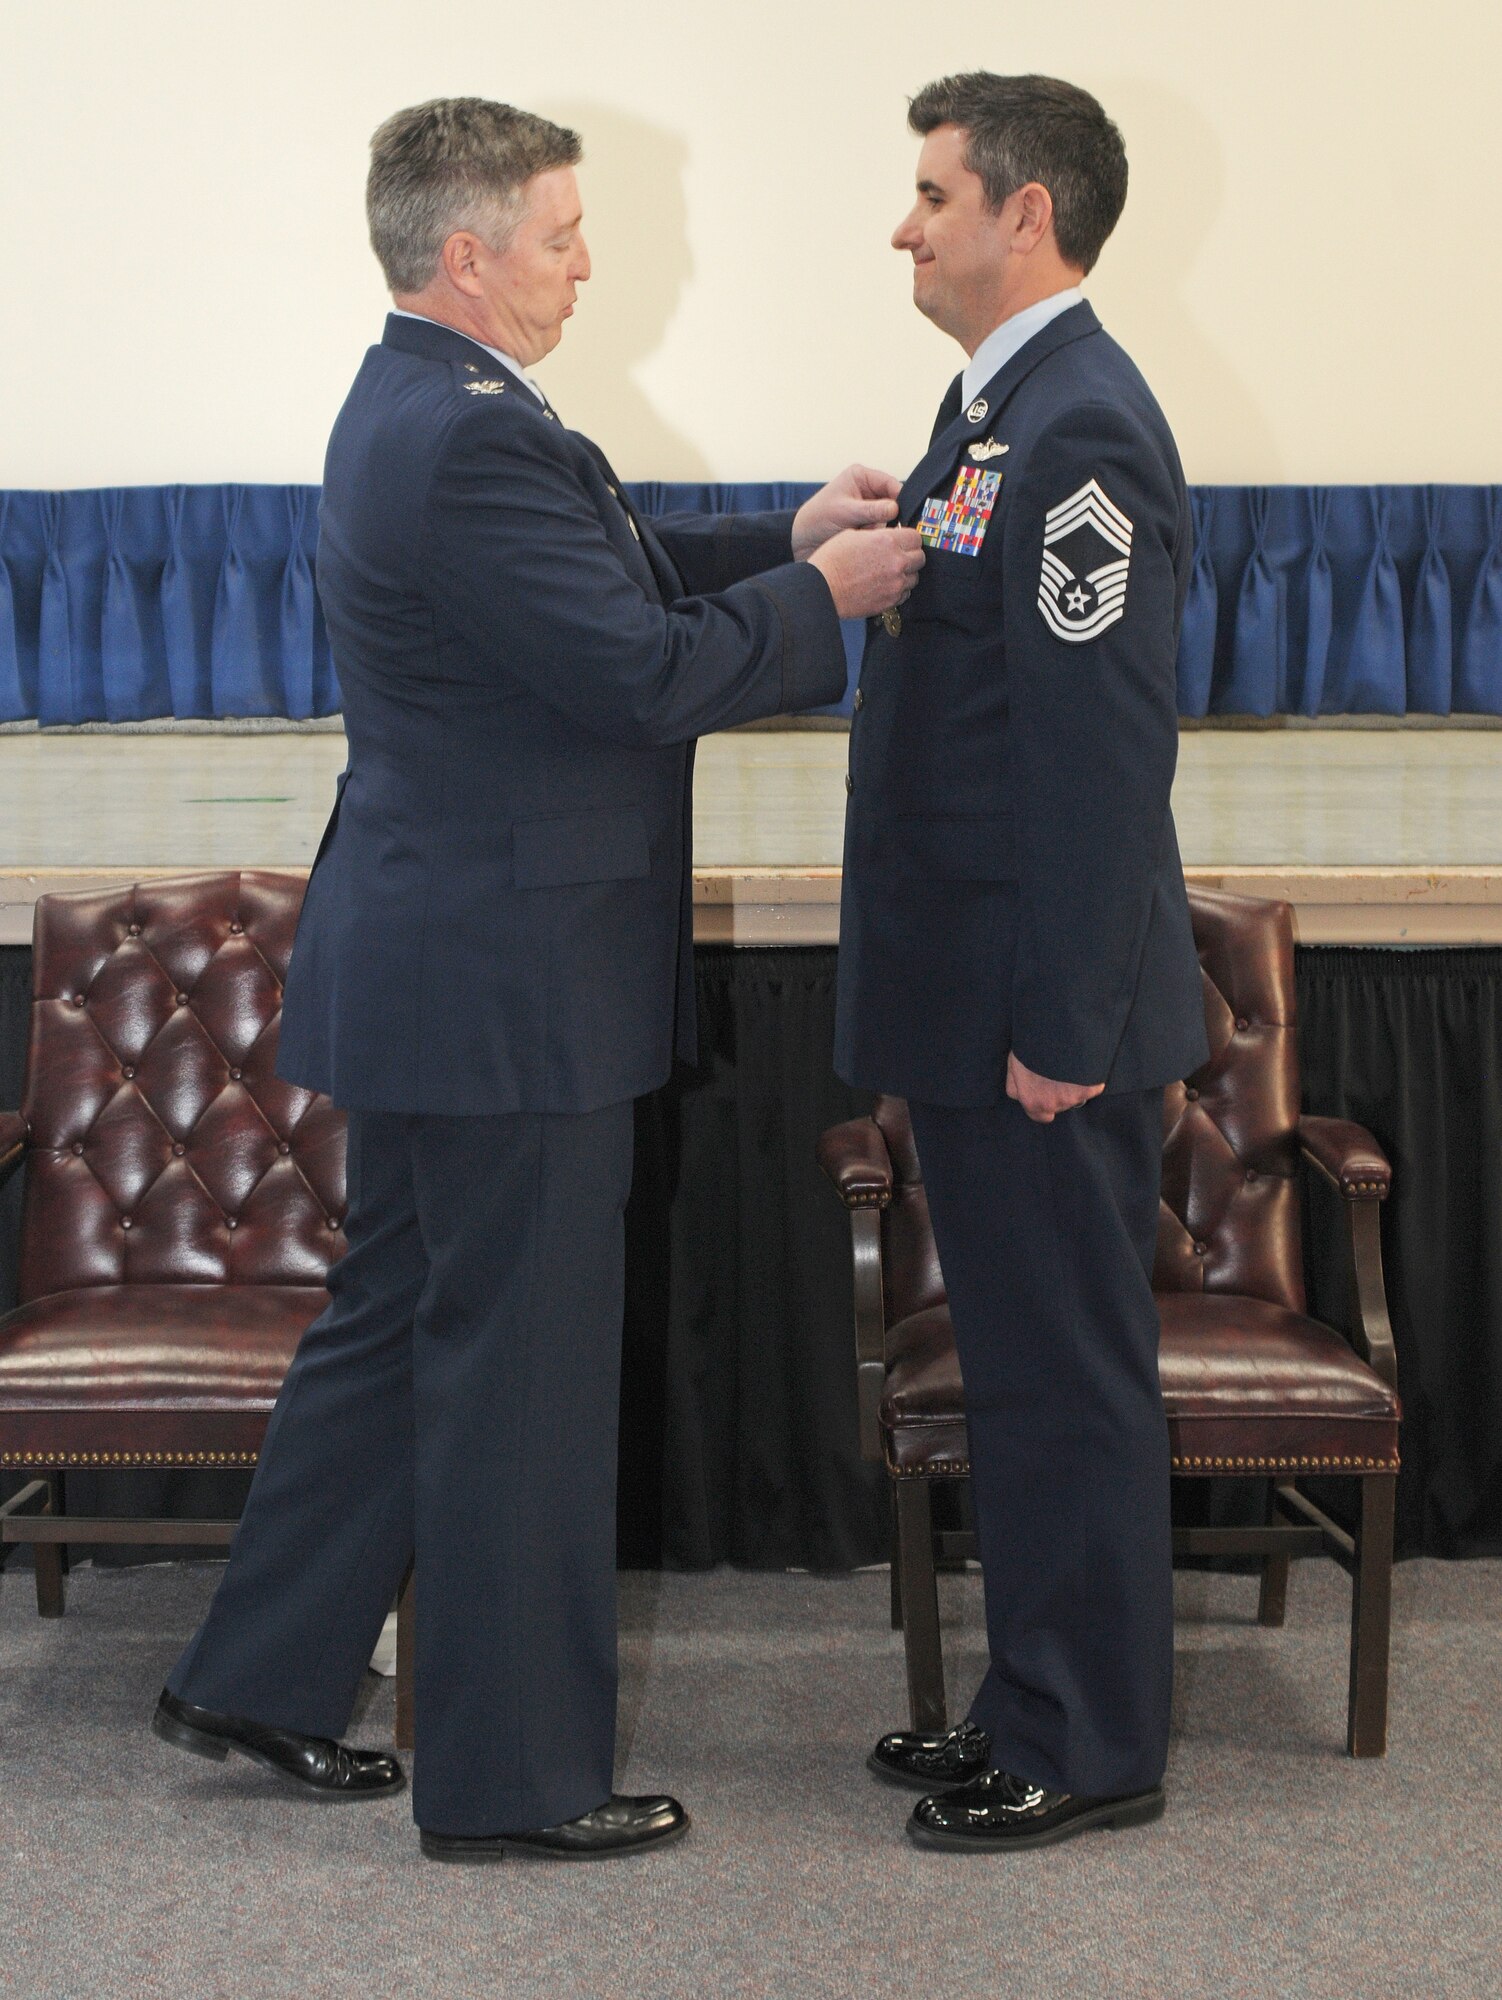 Two figures in profile, Col. reaching across to pin medal on Chief Master Sgt. against a curtain backdrop.